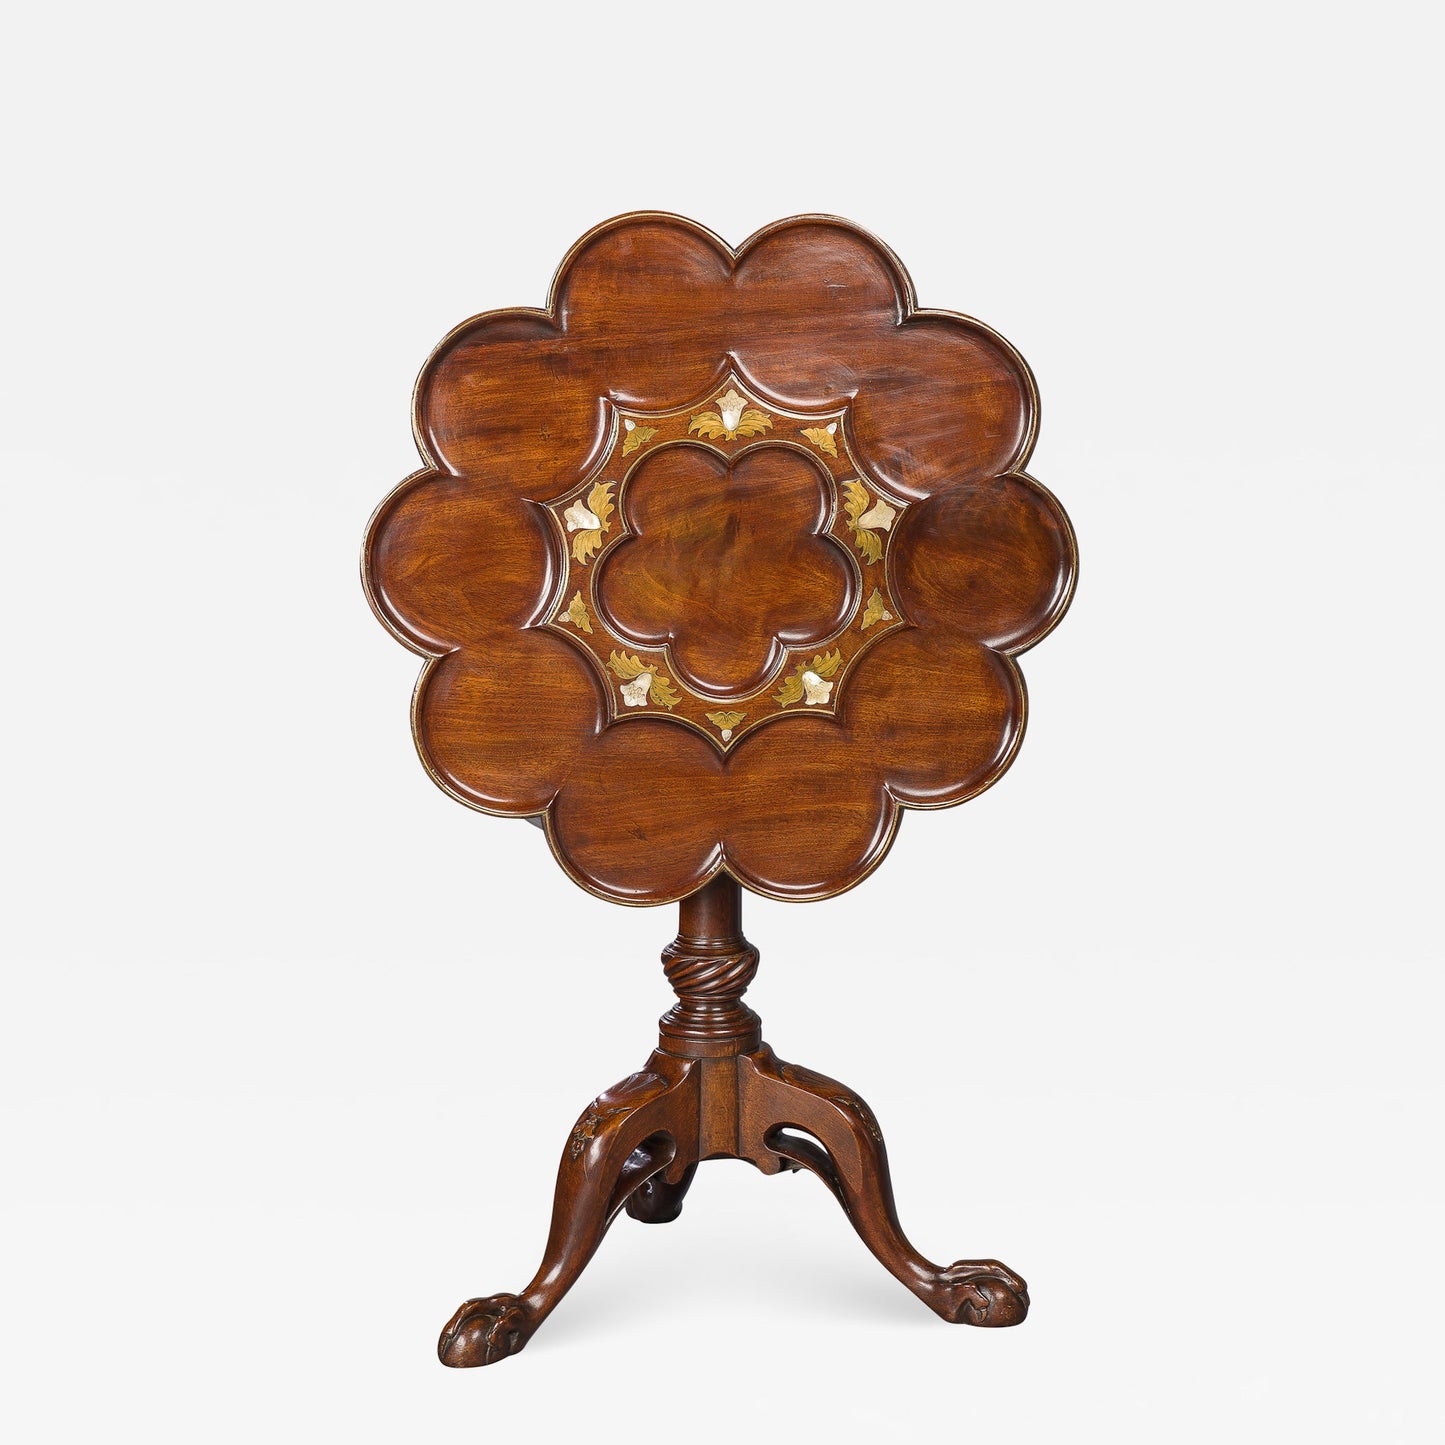 Brass-and-Mother-of-Pearl-Inlaid-Tripod-Table-in-the-Manner-of-Frederick-Hintz-1